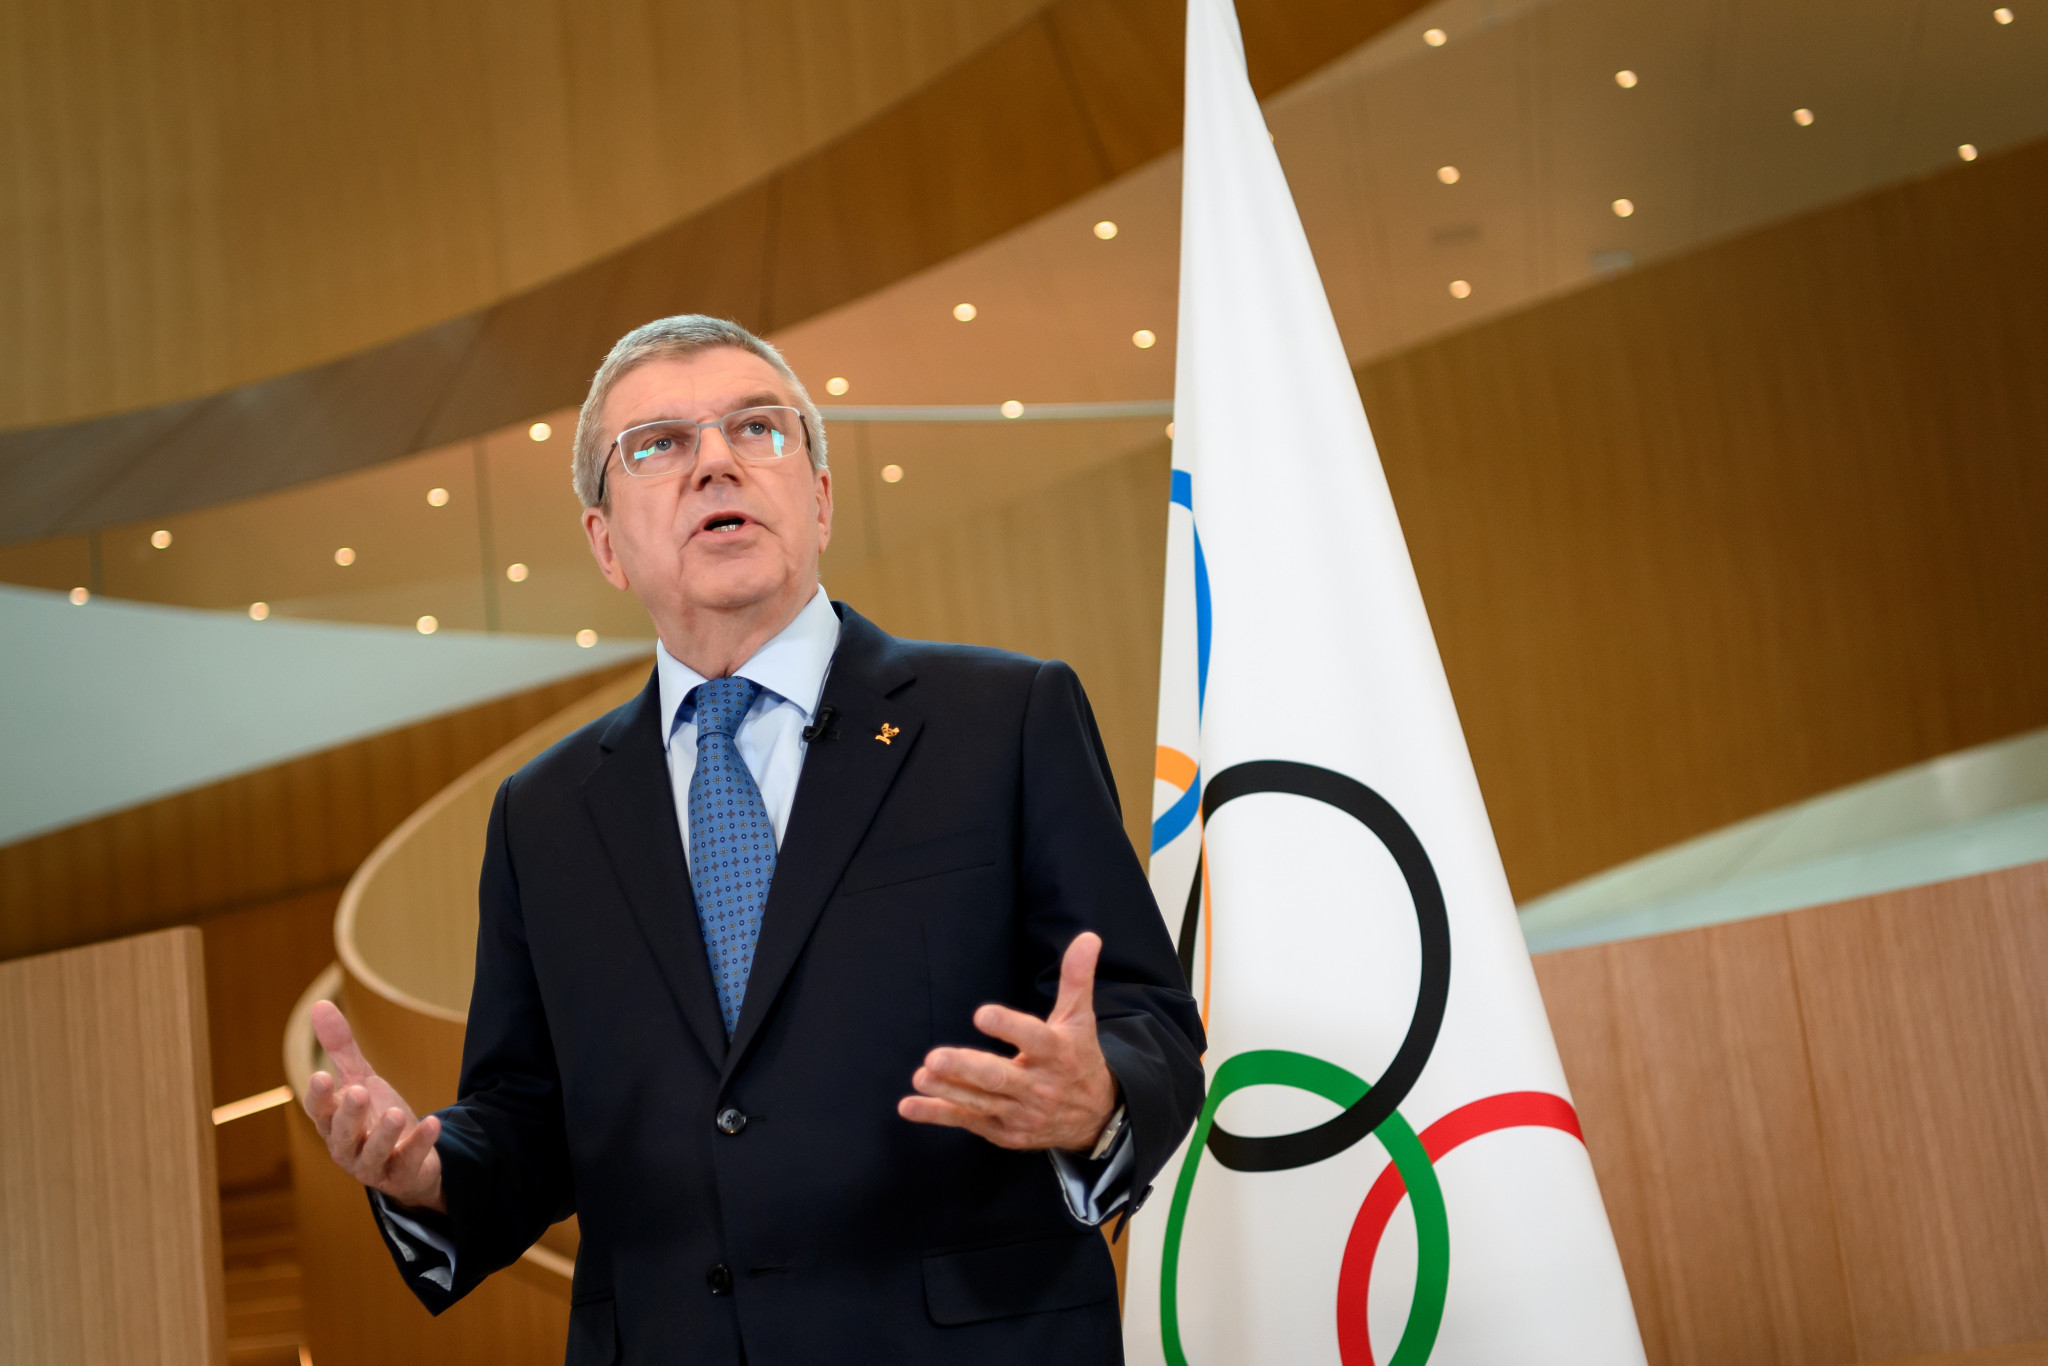 IOC President Thomas Bach called on the Olympic Movement to "look more closely into the proliferation of sports events" in an open letter on the coronavirus pandemic ©Getty Images